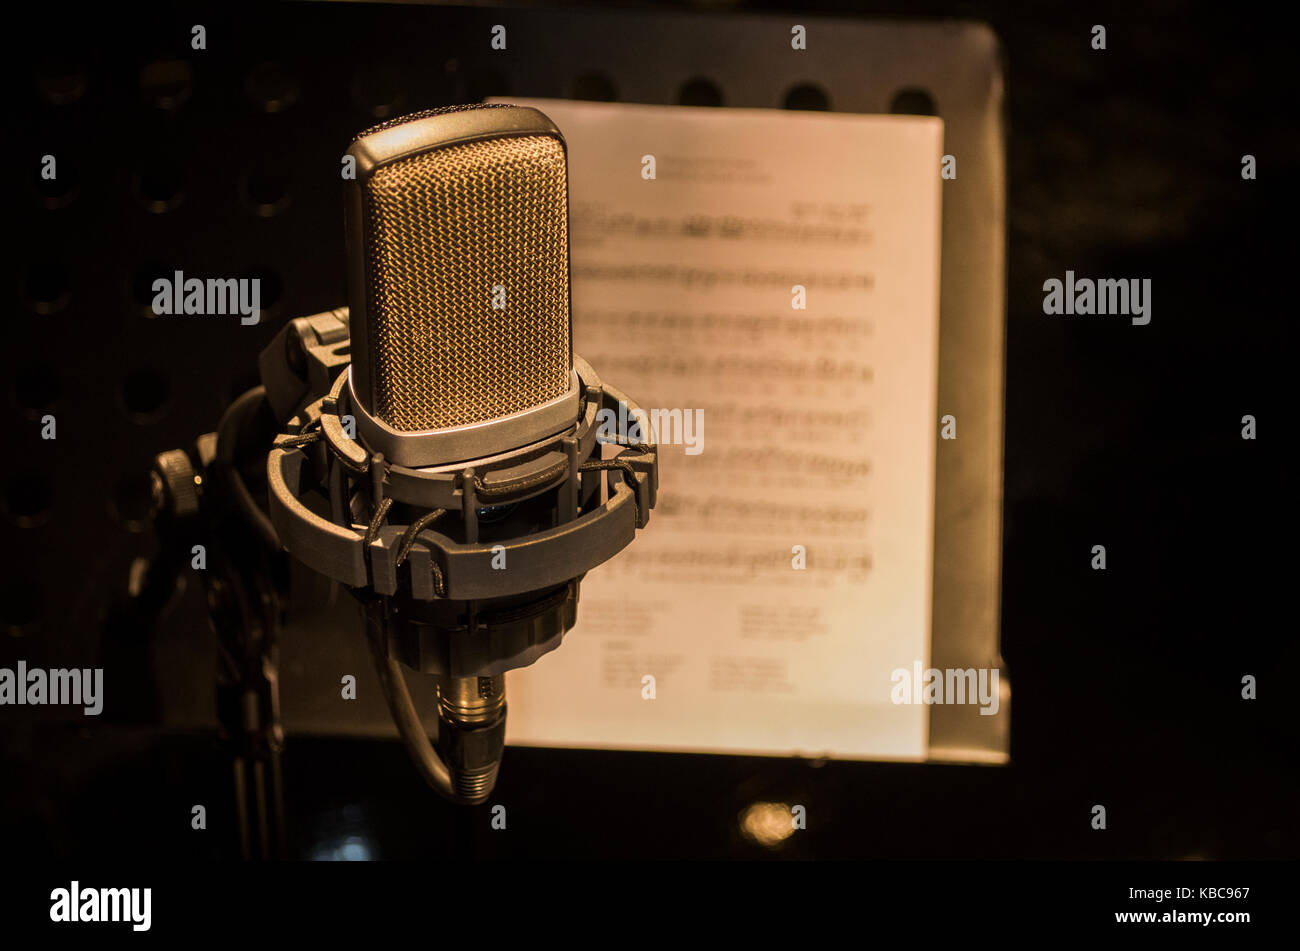 Retro microphone on stage a background of musical note Stock Photo